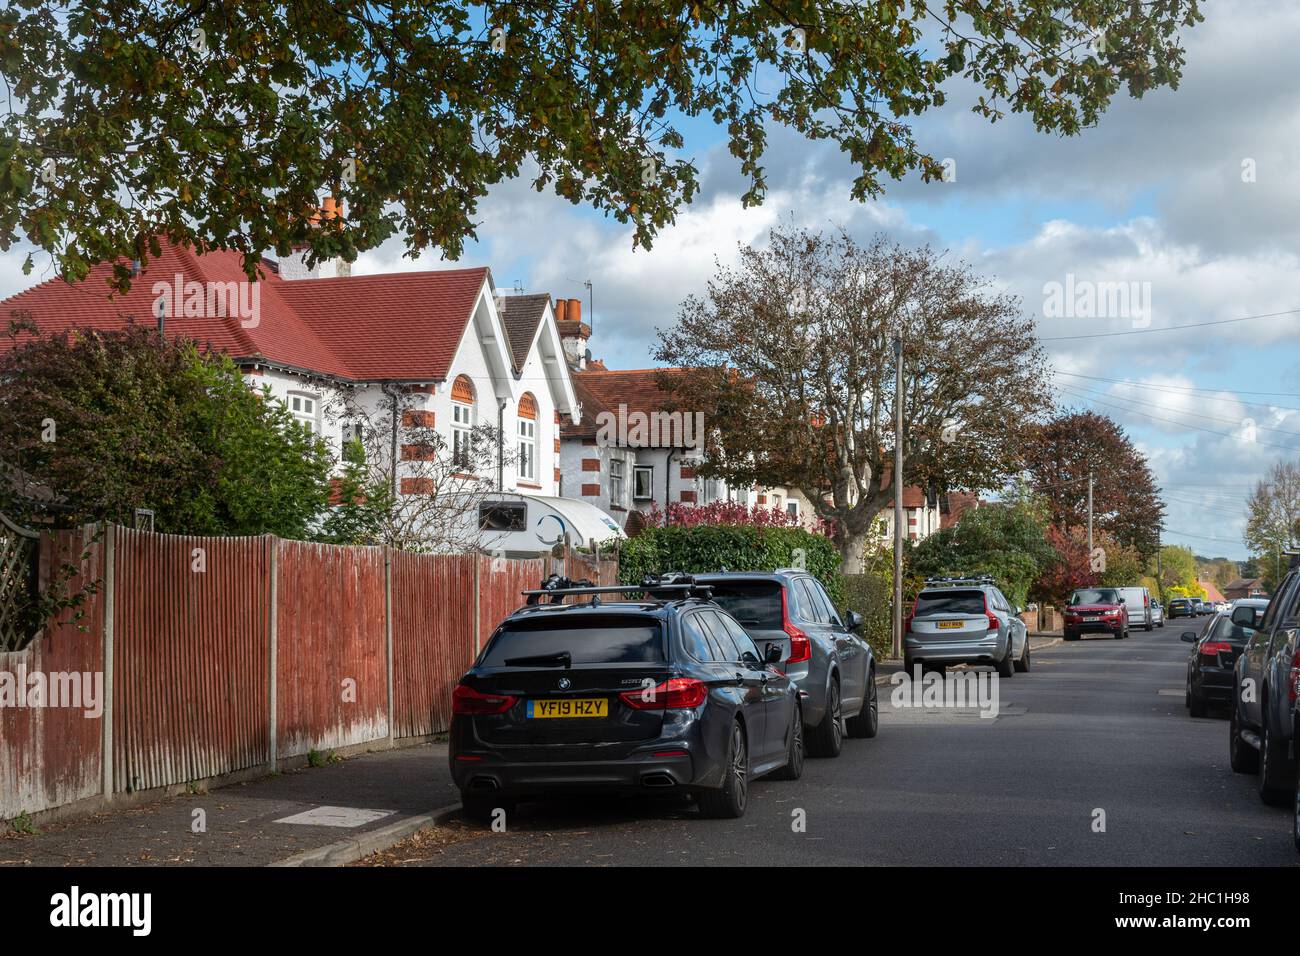 Typical Surrey residential street view. Tillingbourne Road in Shalford village, Surrey, England, UK, with houses properties and parked cars. Stock Photo